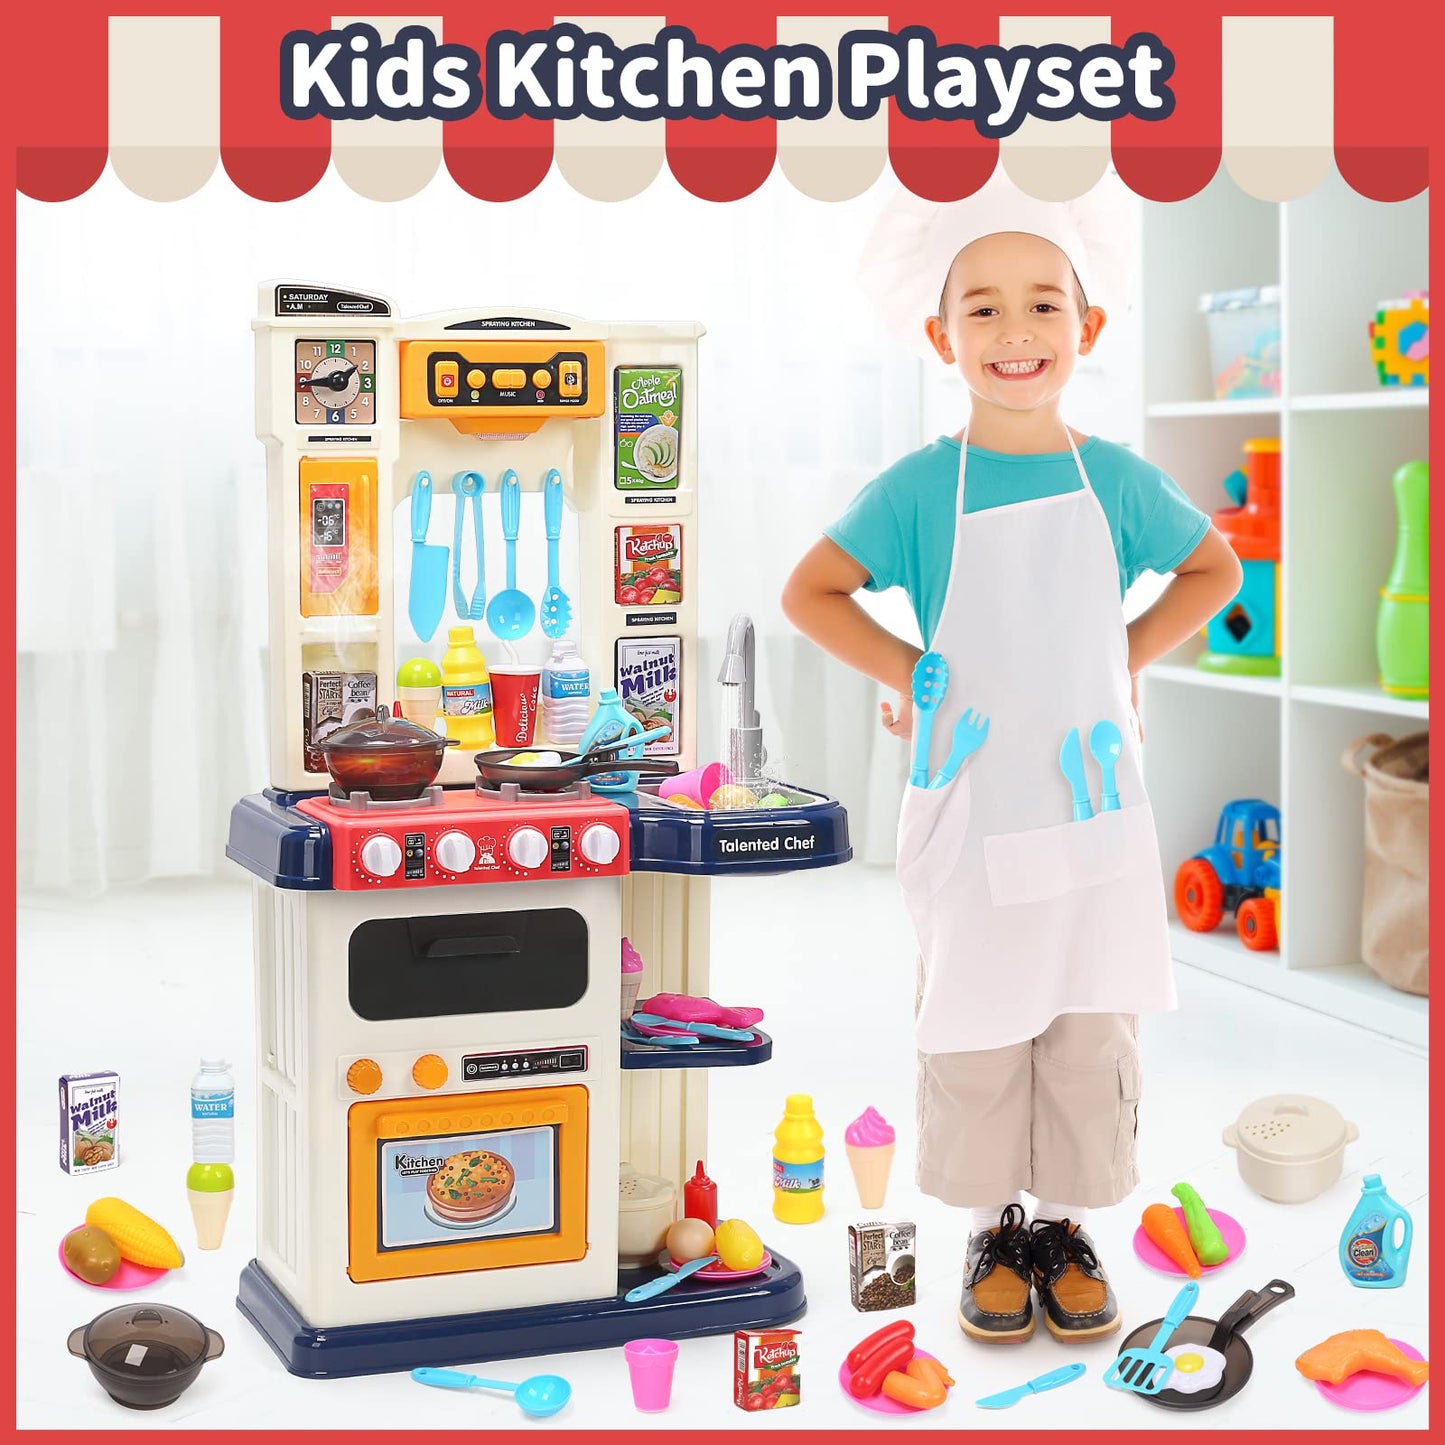 CUTE STONE Play Kitchen, Kids Kitchen Playset with Play Sink, Cooking Stove with Steam, Real Sounds & Lights